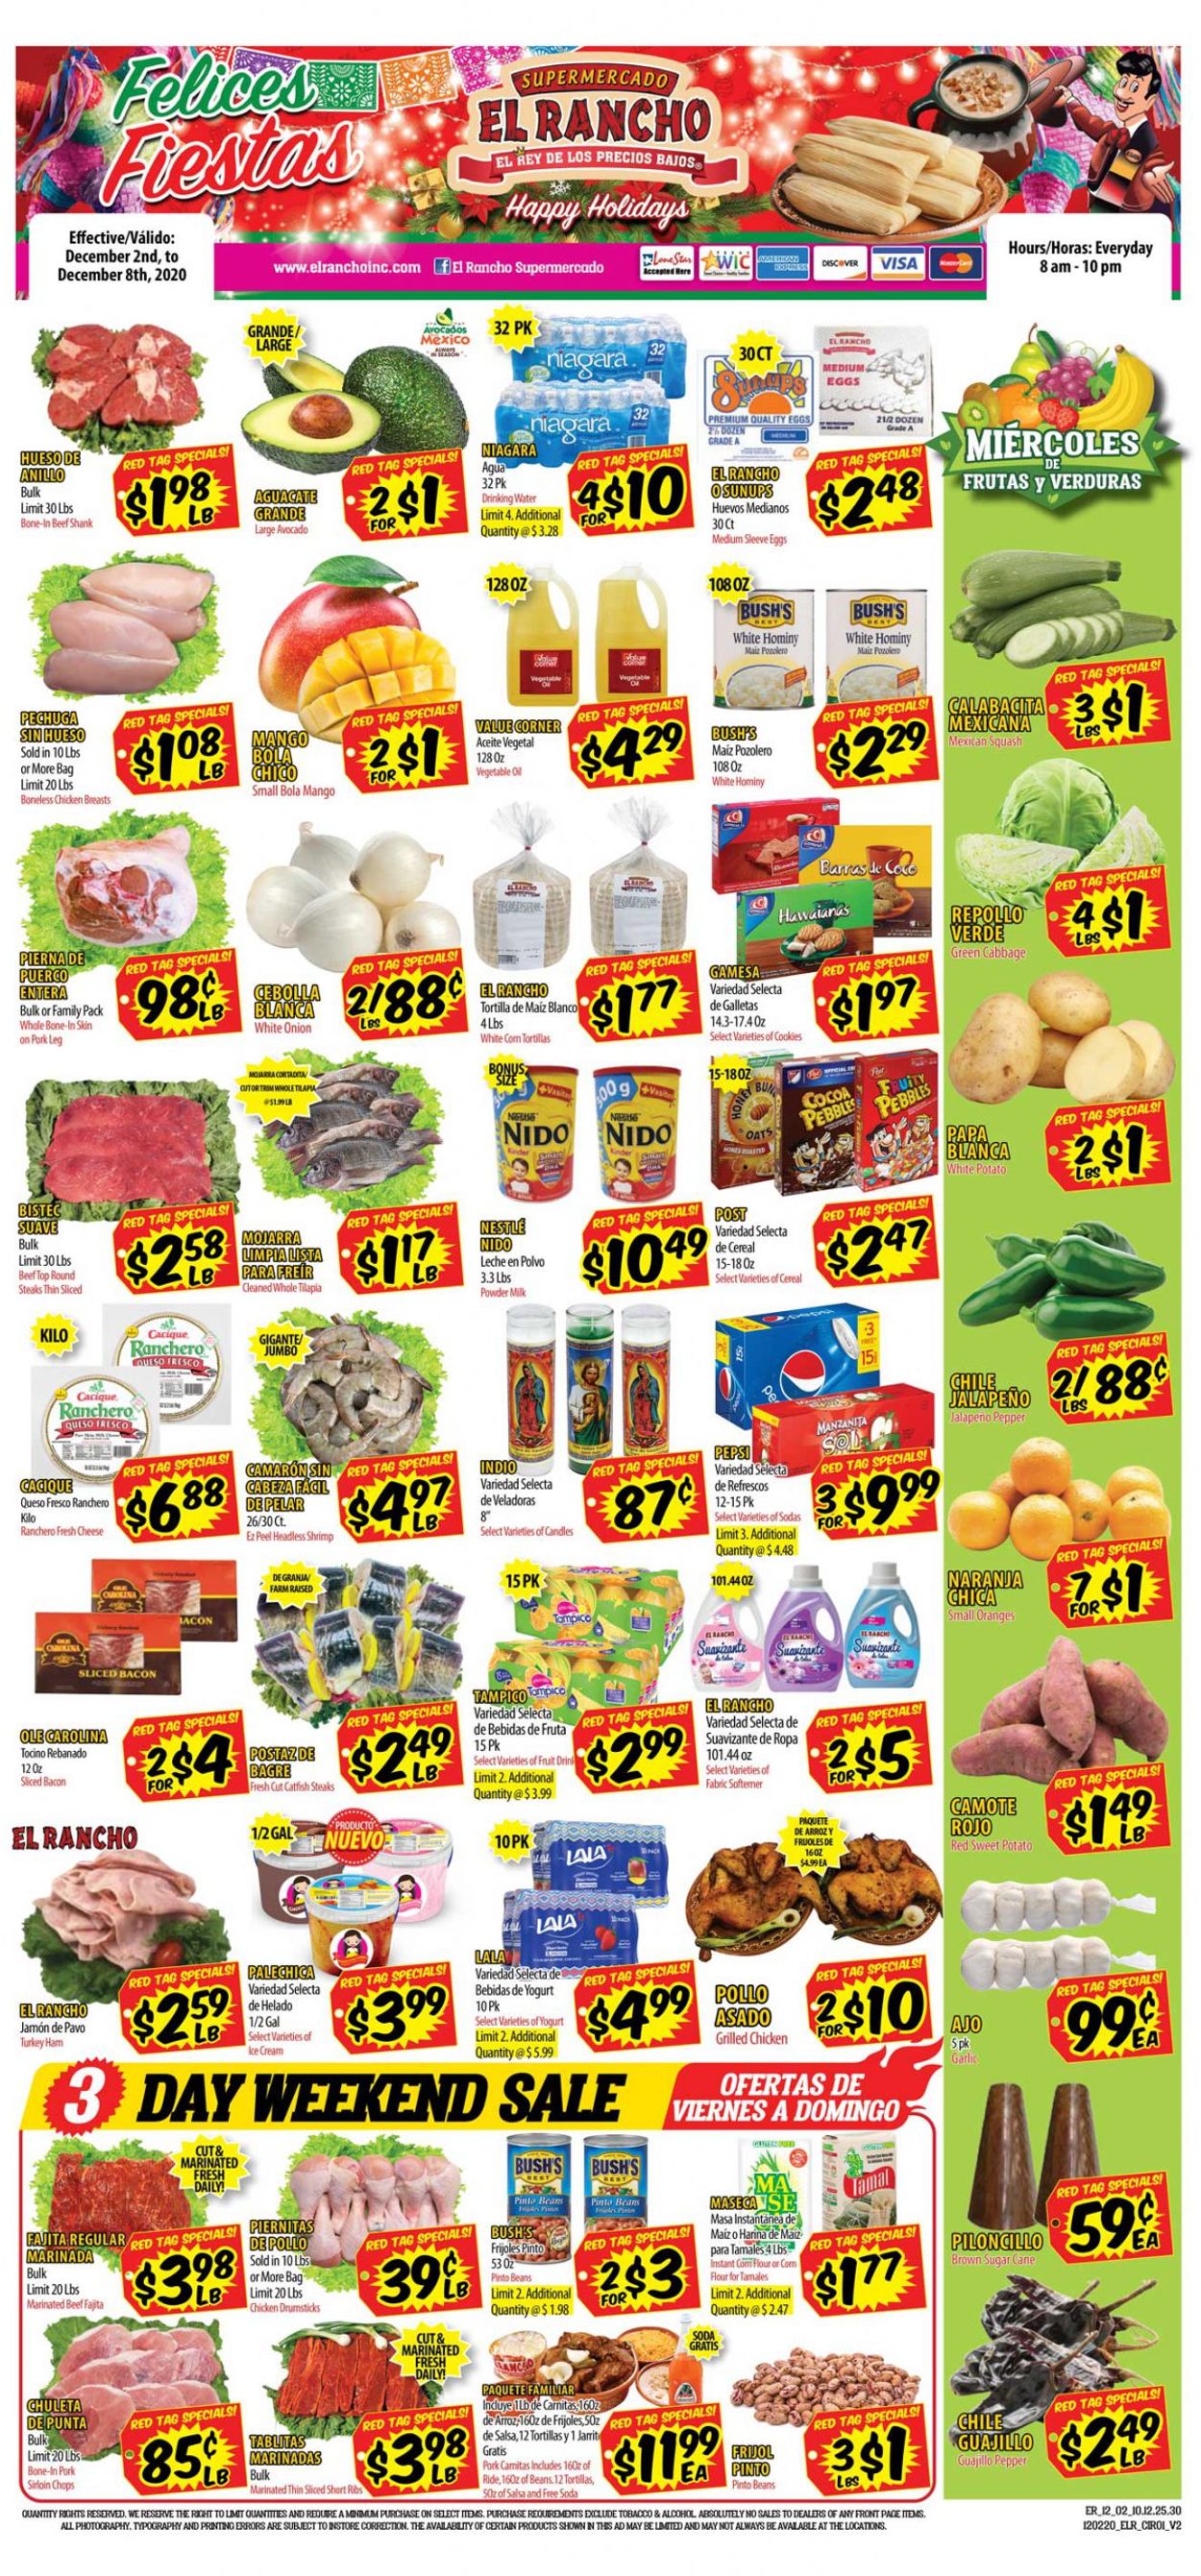 El Rancho Current weekly ad 12/02 - 12/08/2020 - frequent-ads.com